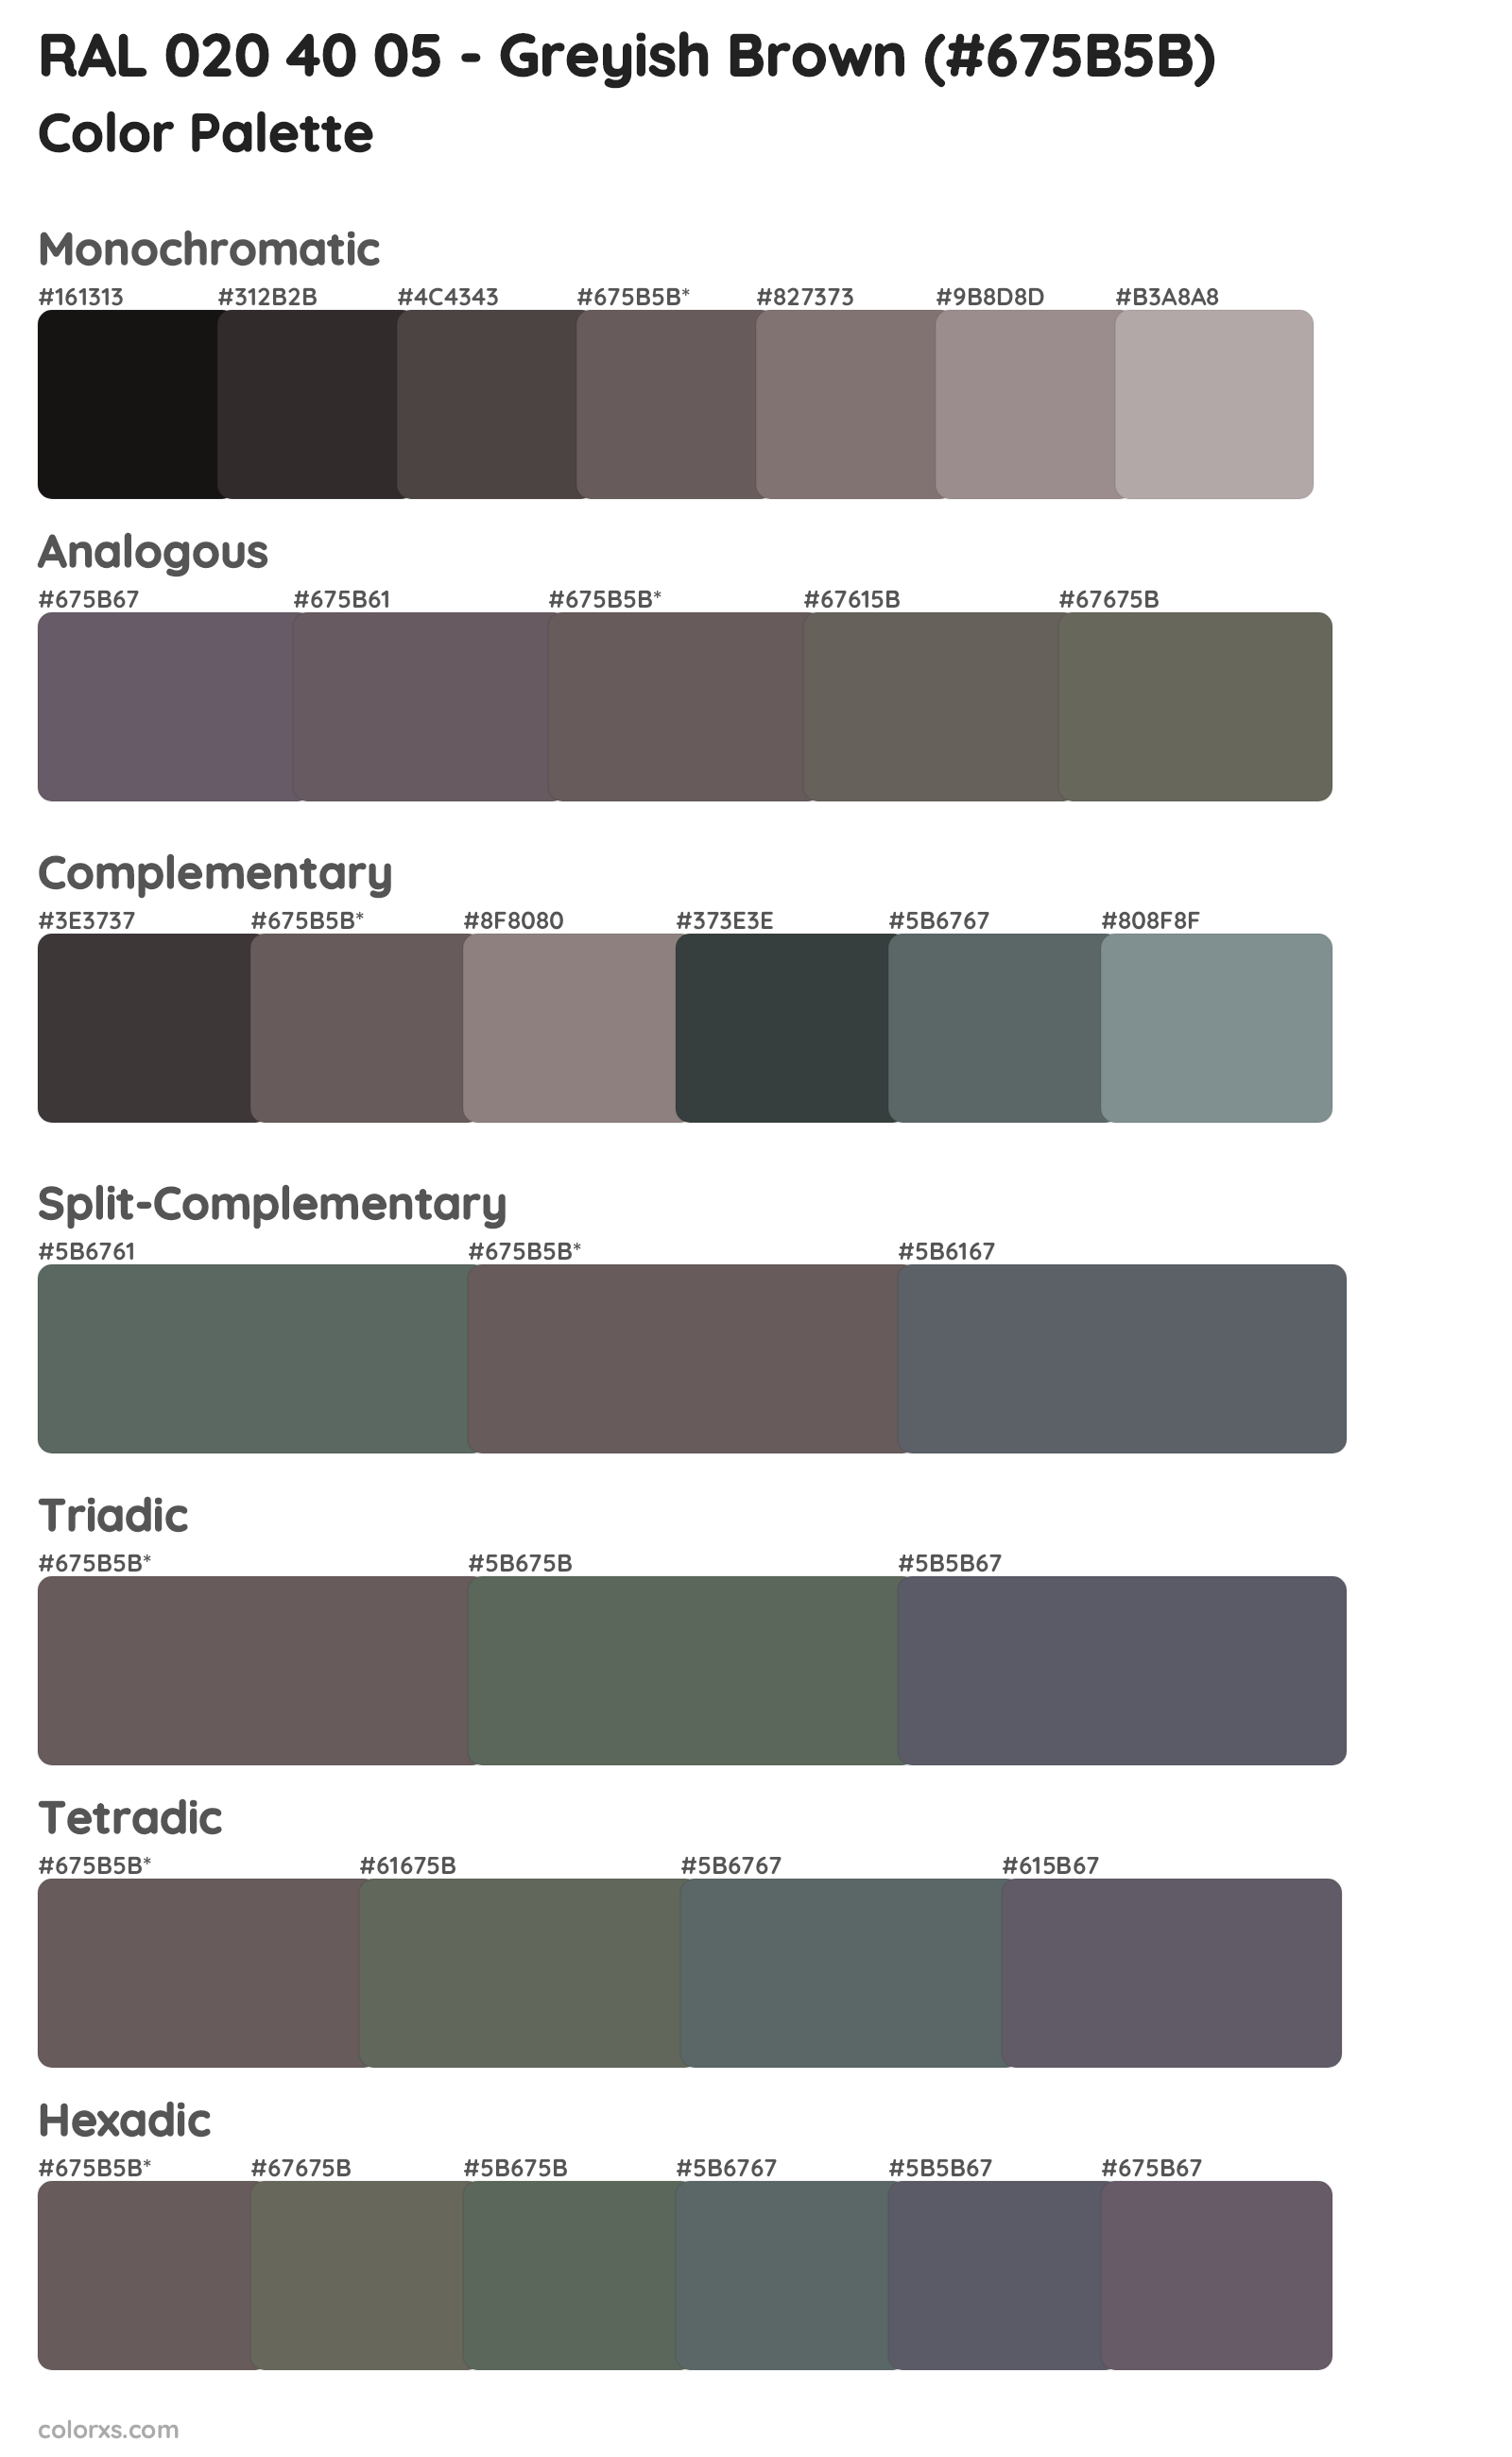 RAL 020 40 05 - Greyish Brown Color Scheme Palettes